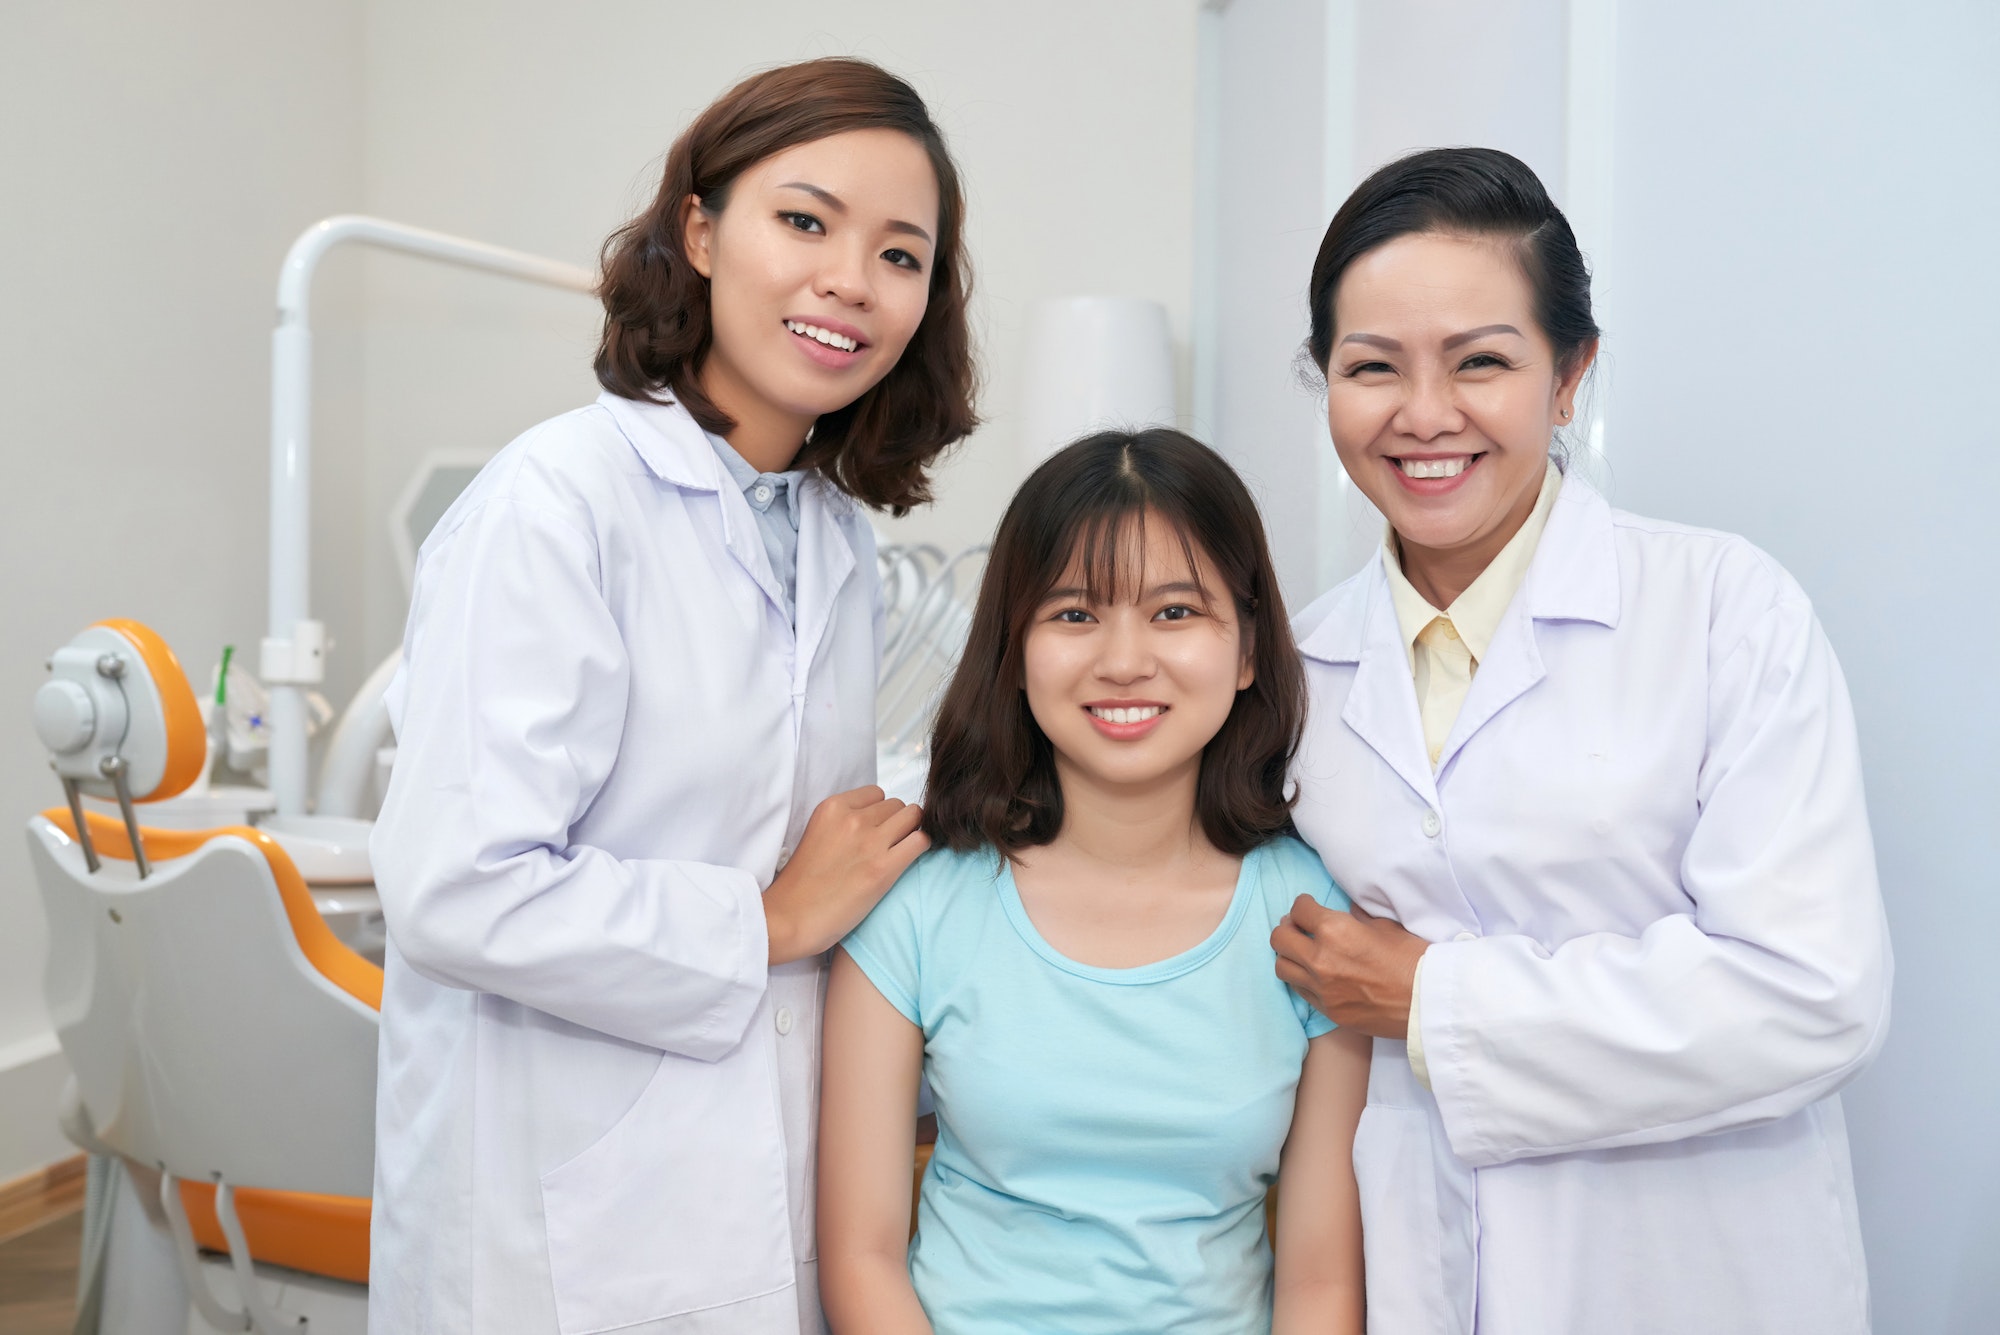 Smiling doctors with girl in dental office